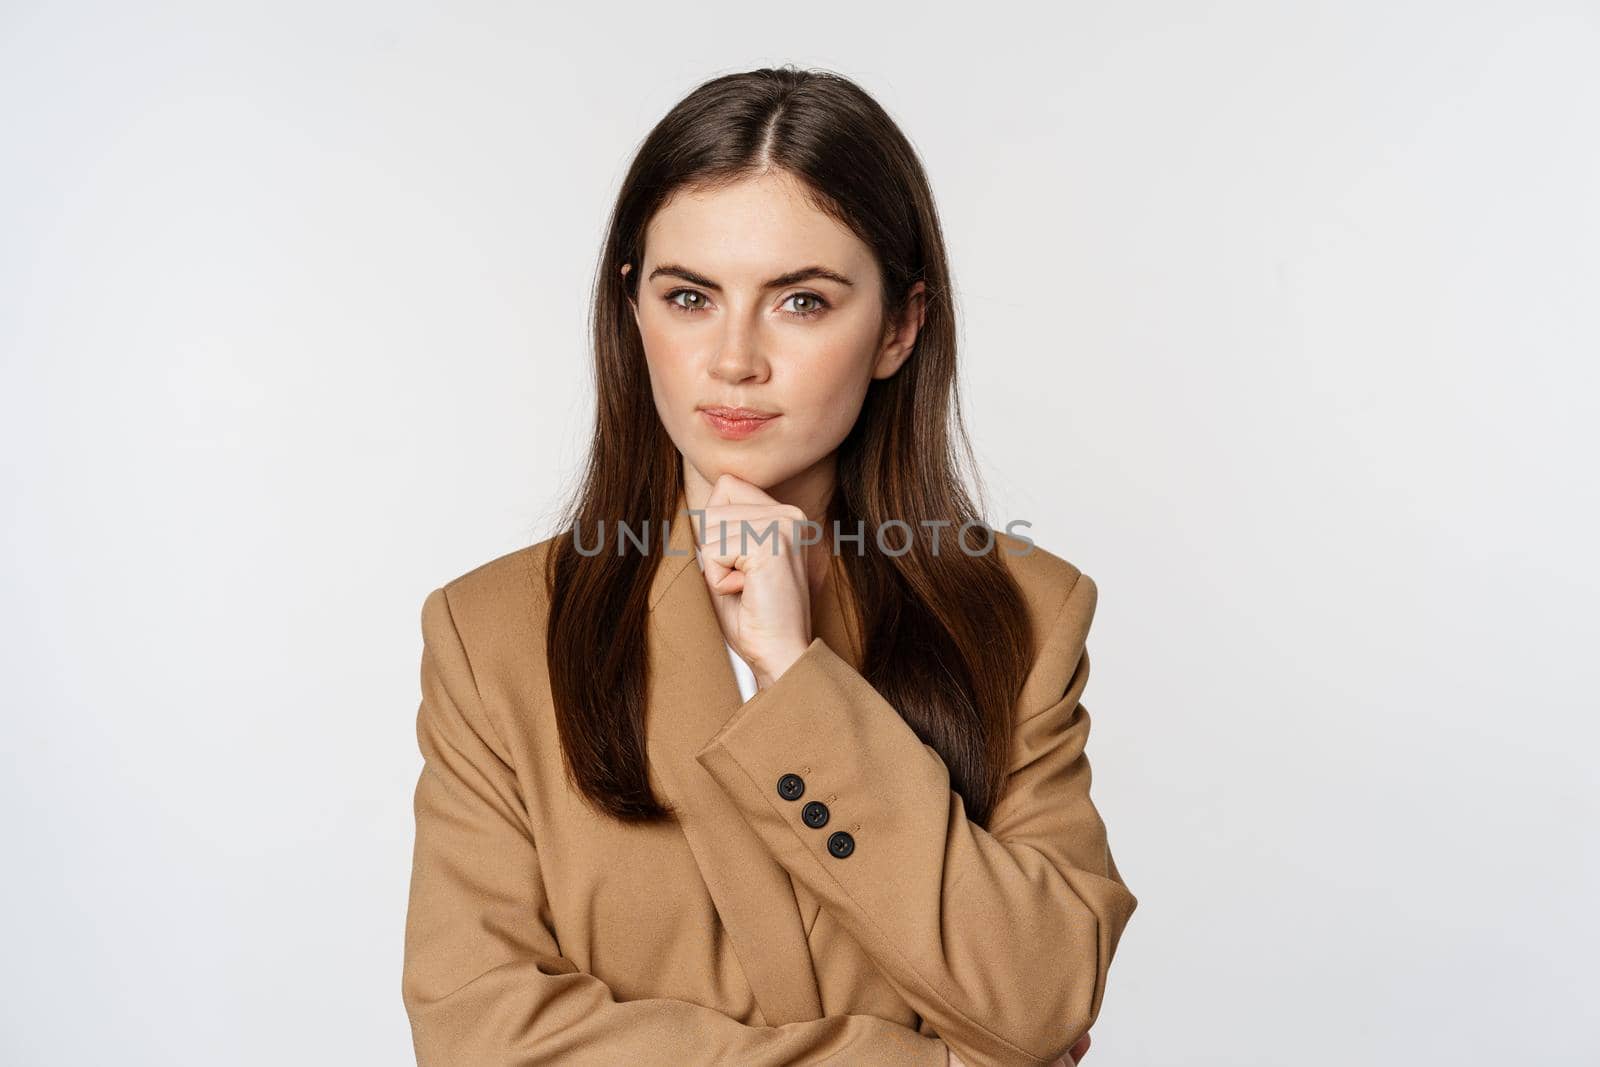 Image of businesswoman thinking, corporate woman looking thoughtful, making decision, standing in brown suit over white background.